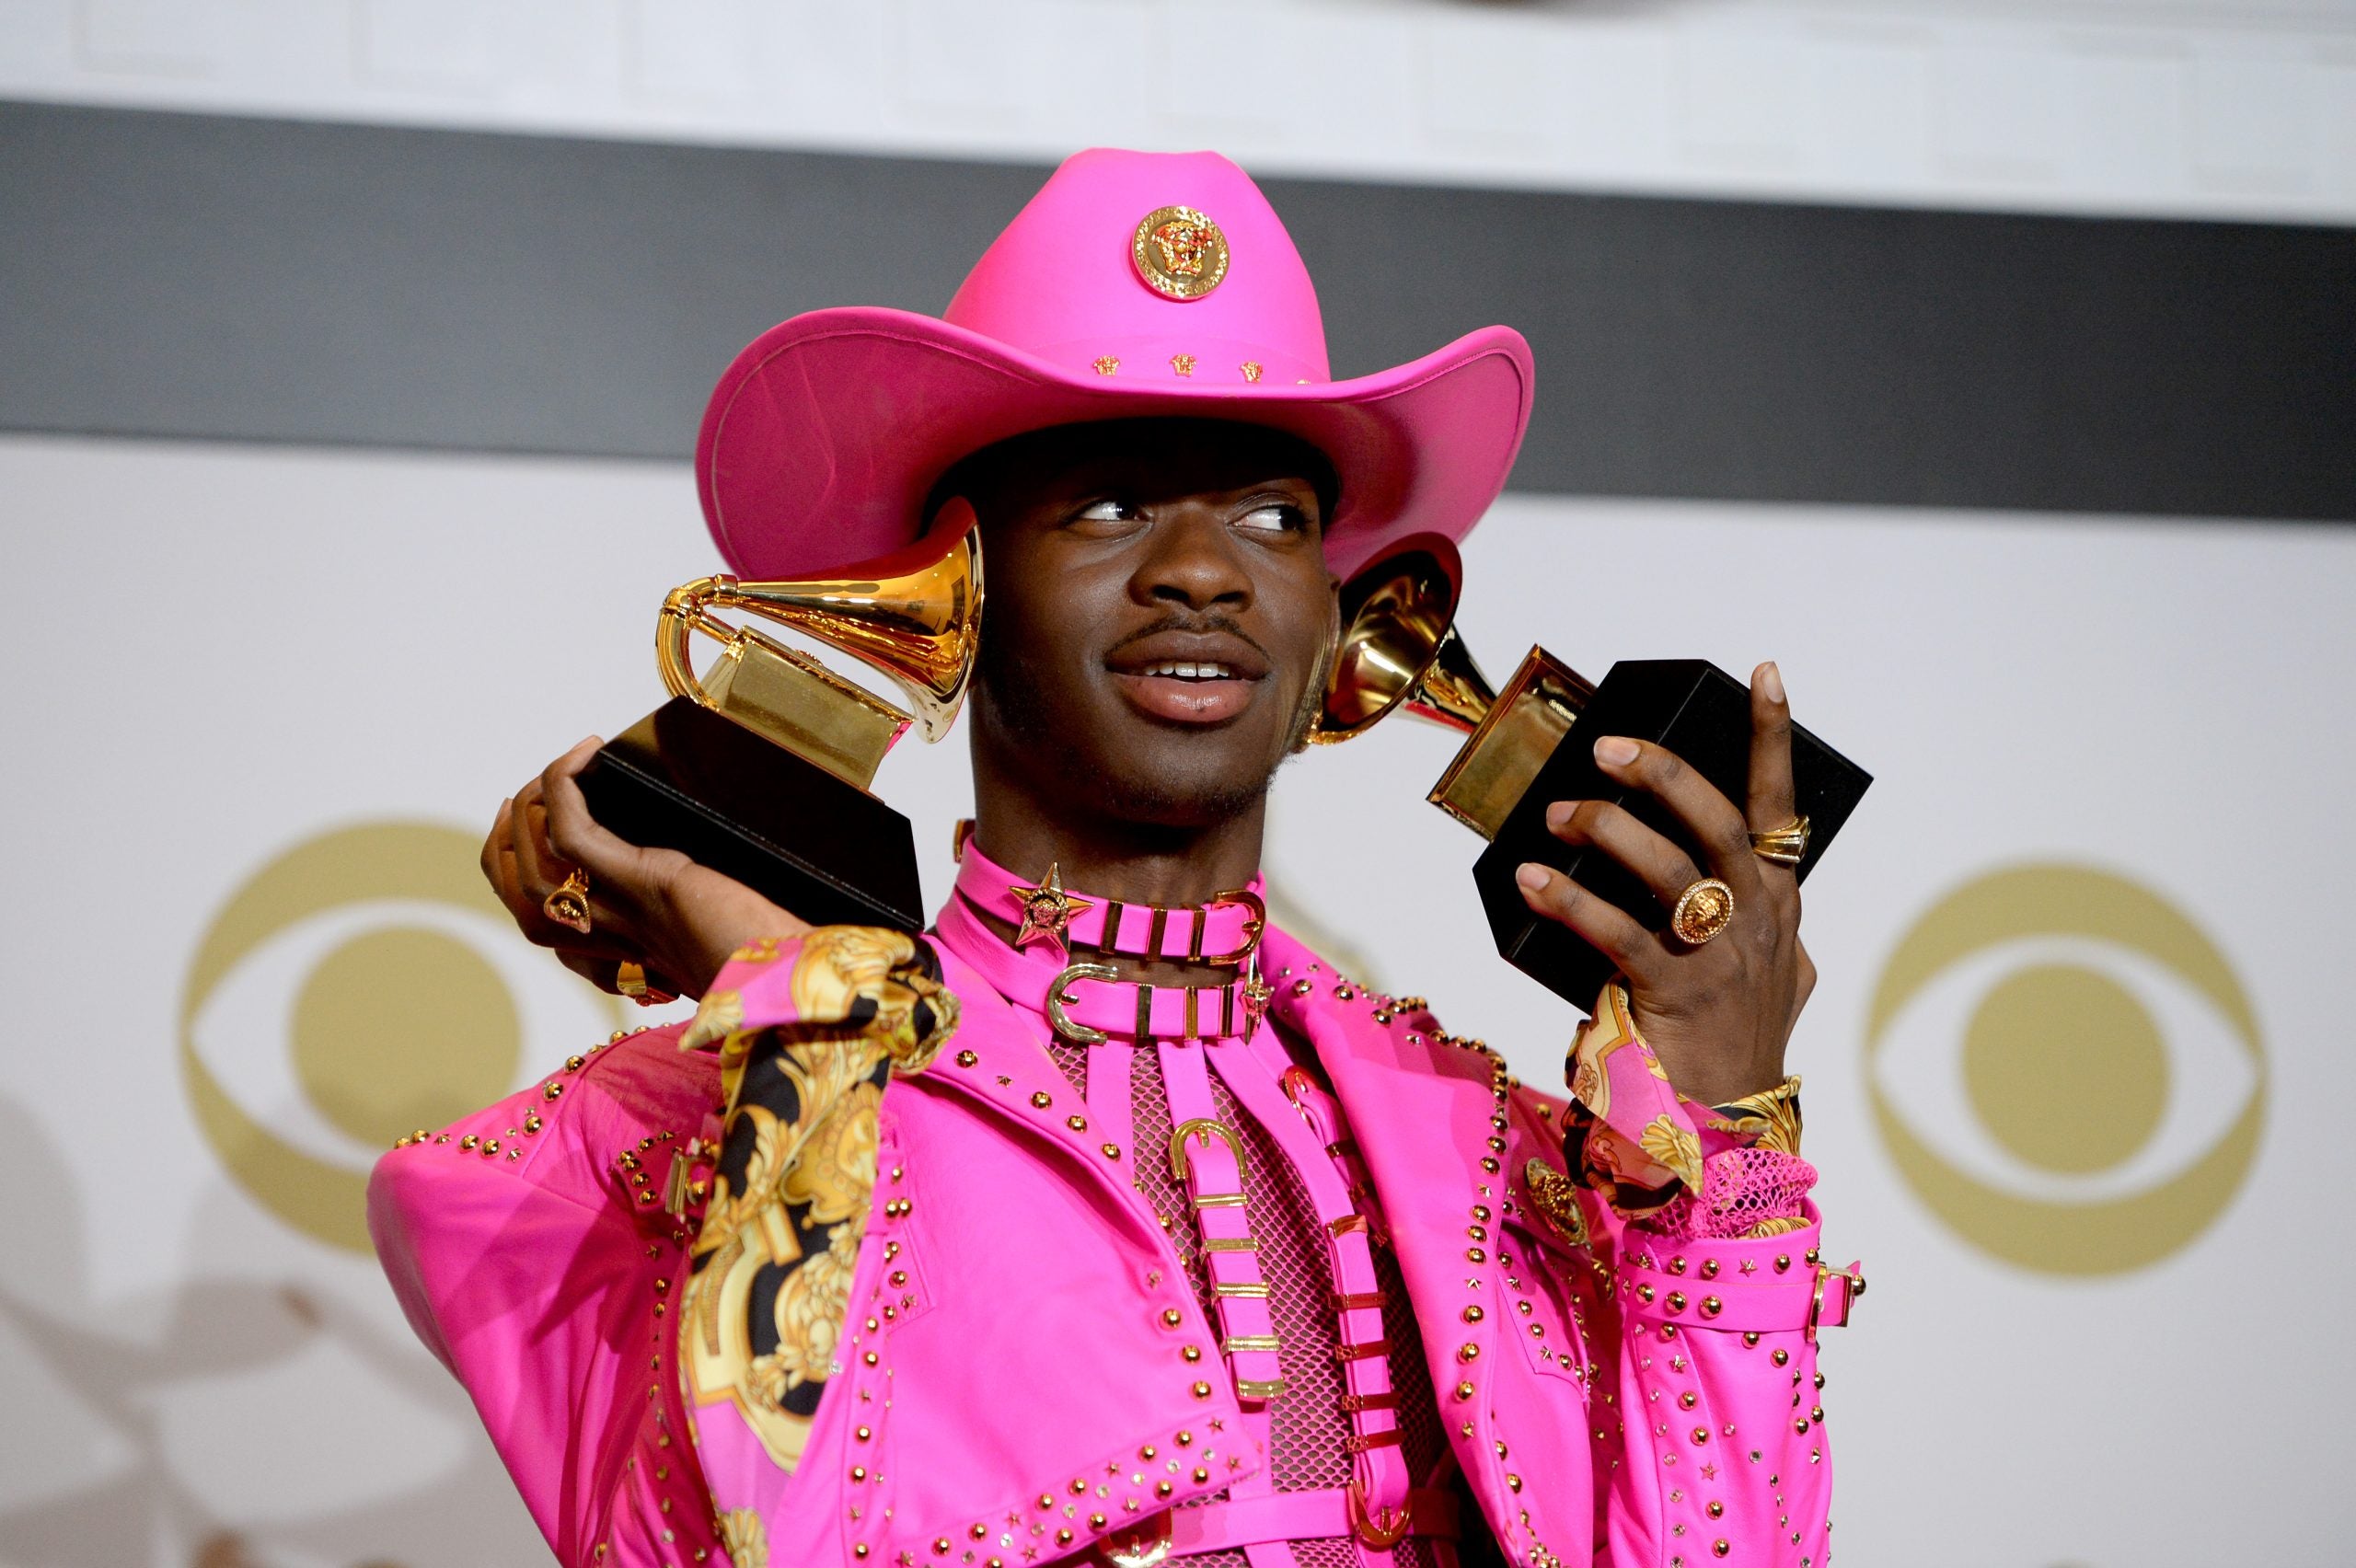 Lil Nas X Is A Gay Visionary That Our Culture Needs